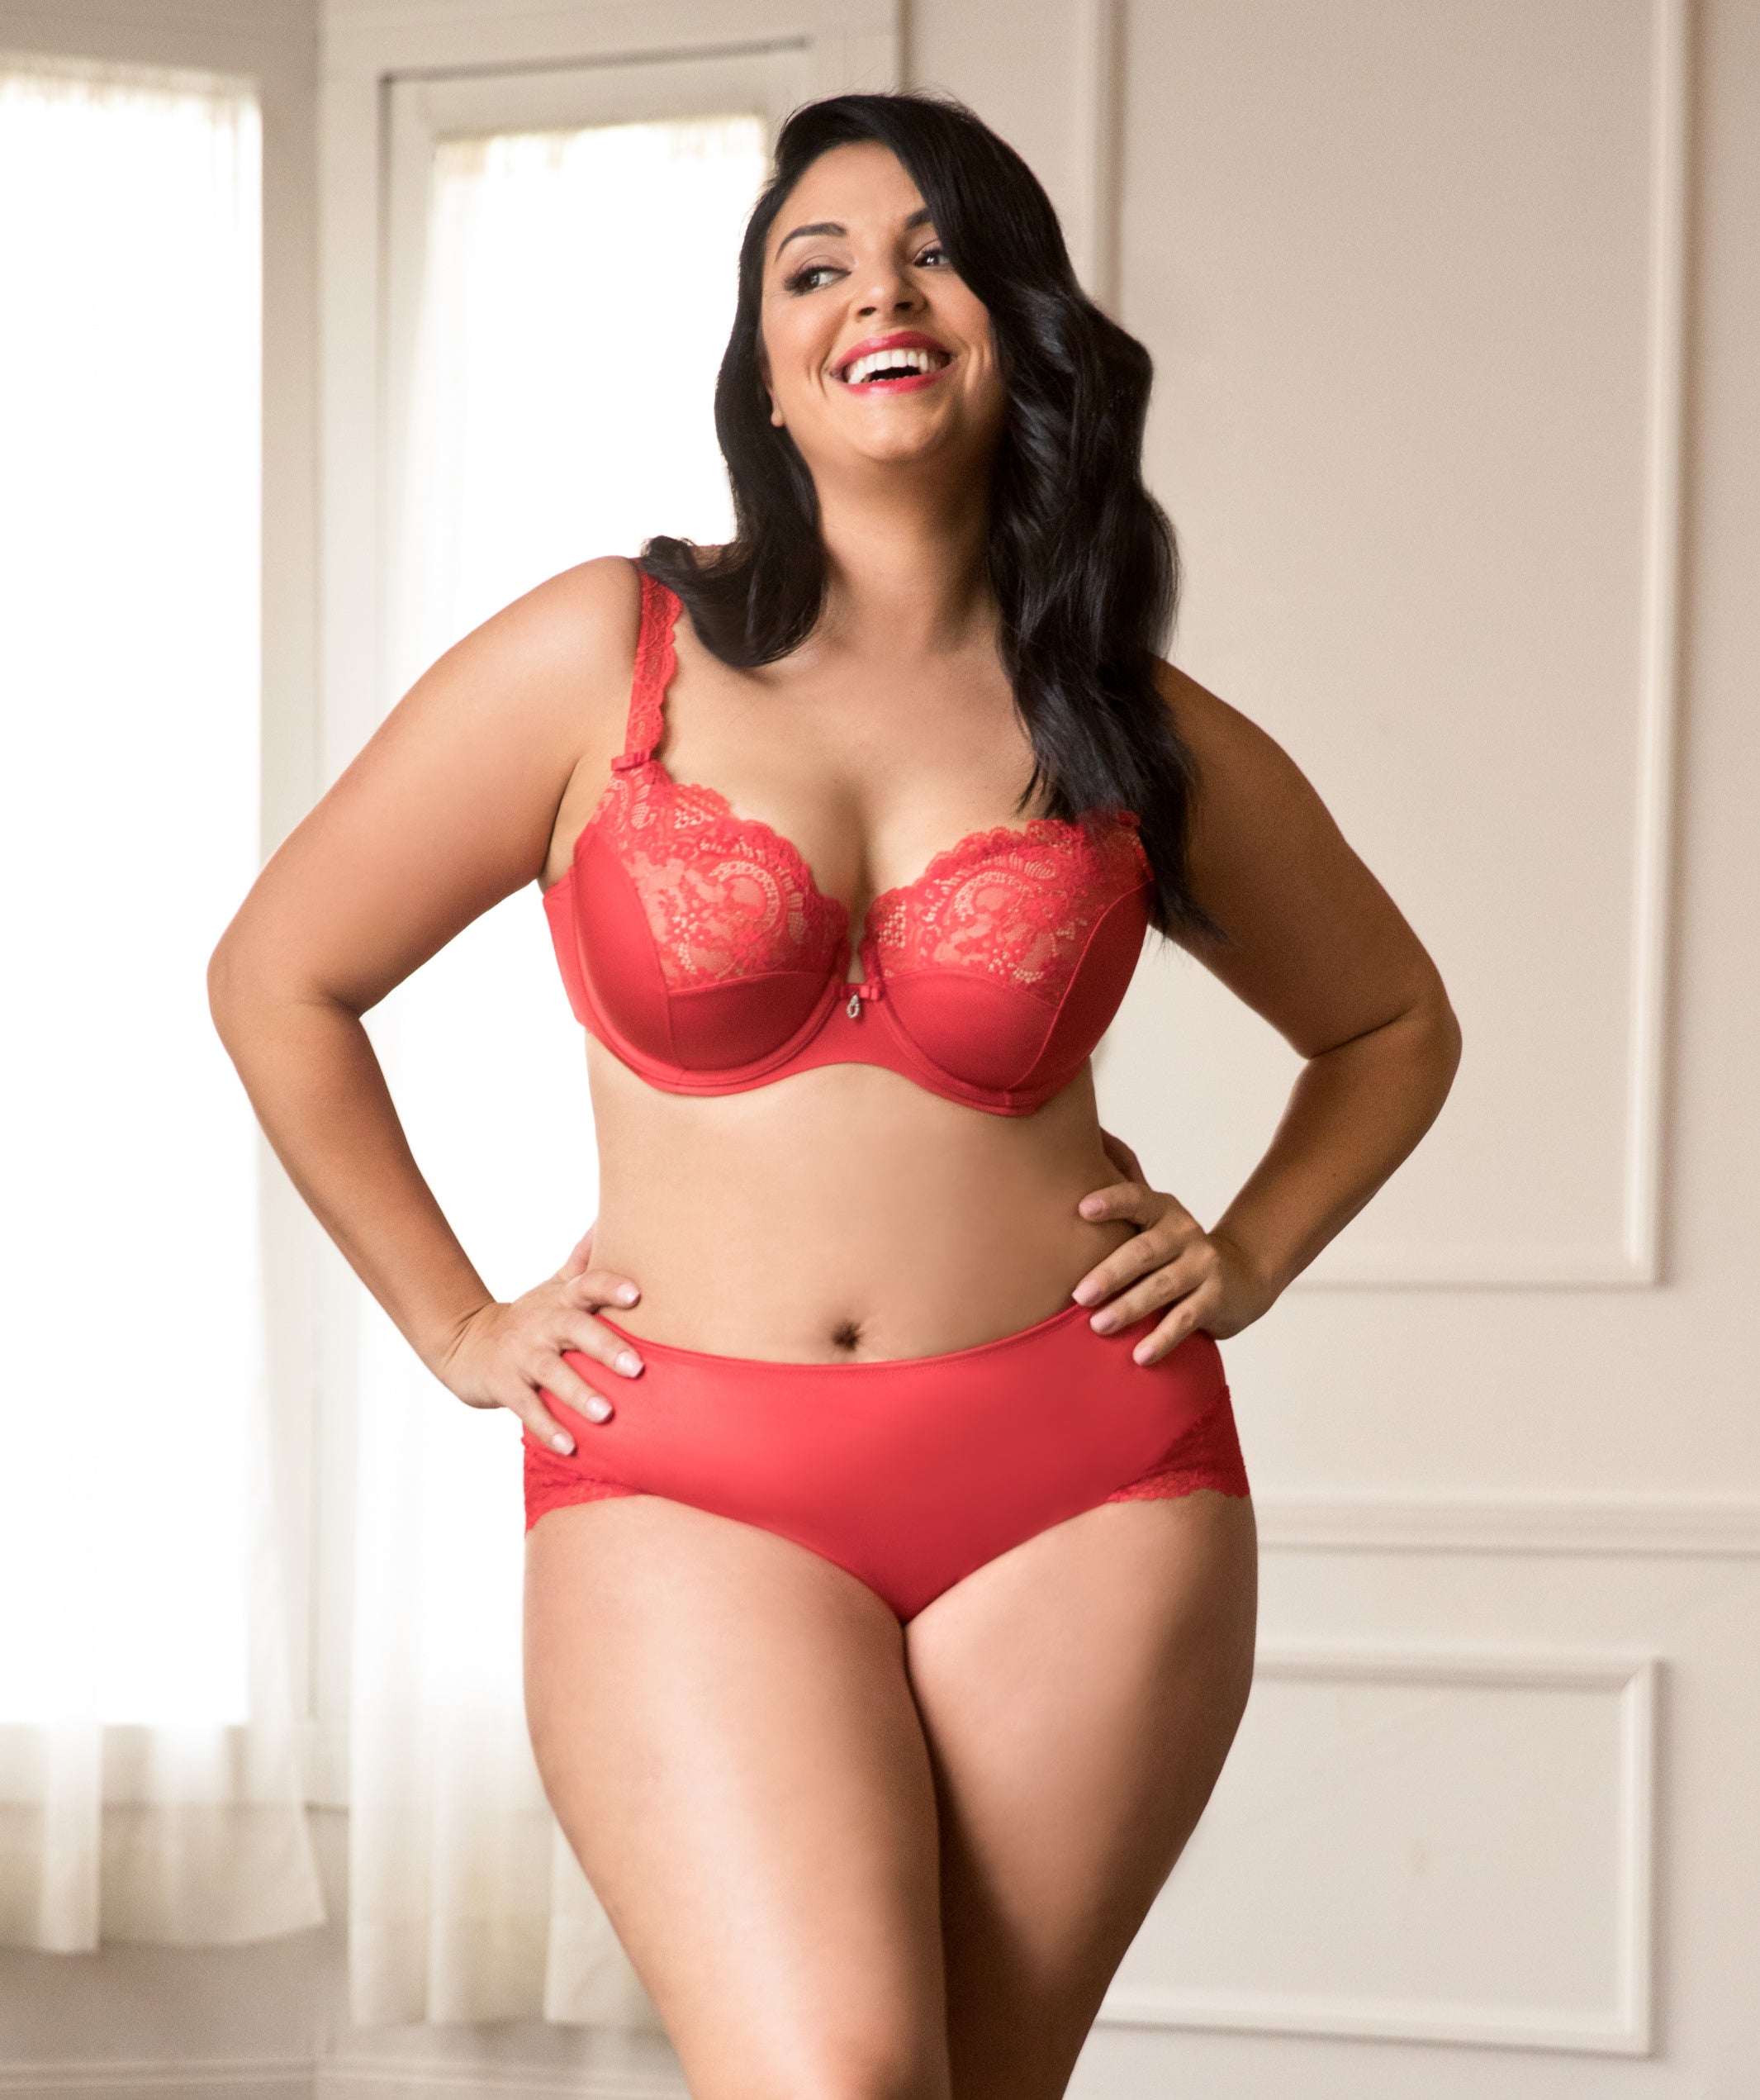 5 Plus Size Lingerie Inspirations We're Loving For Holiday – Curvy